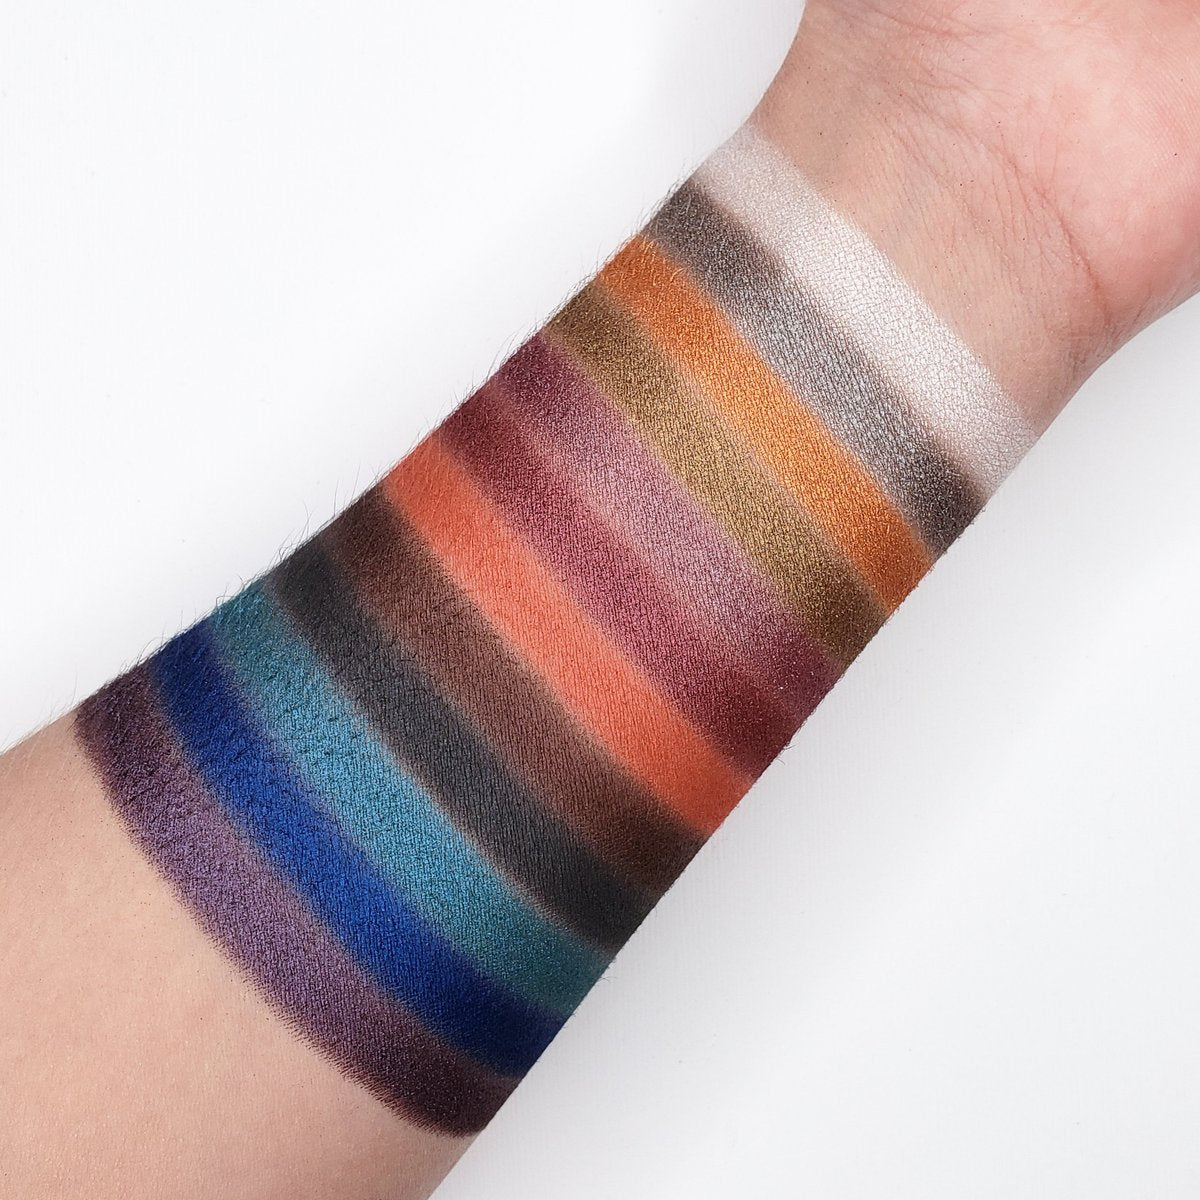 Pro Eyeshadow Bold Collection